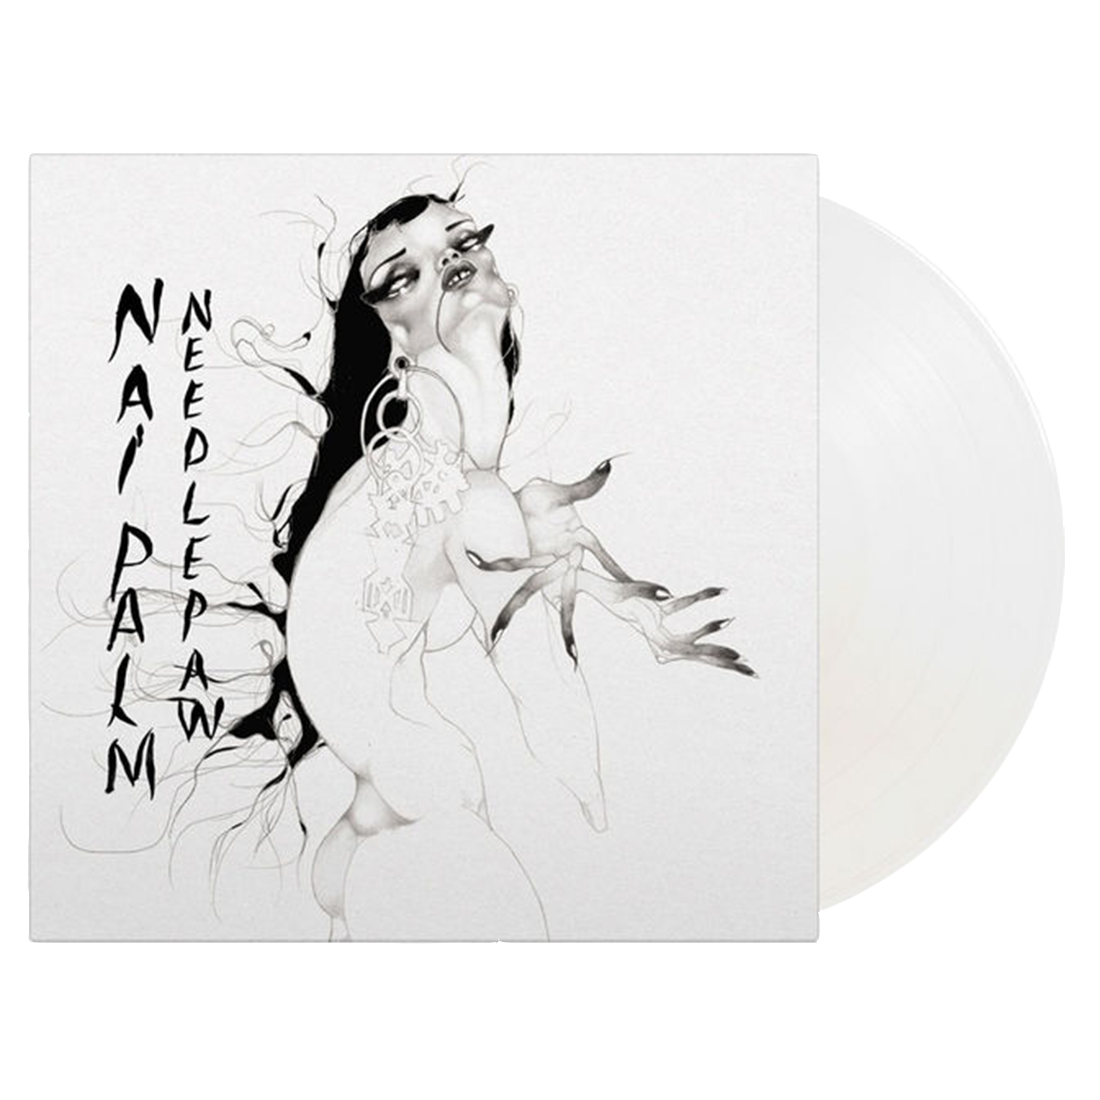 Needle Paw: Limited Edition Solid White Vinyl LP